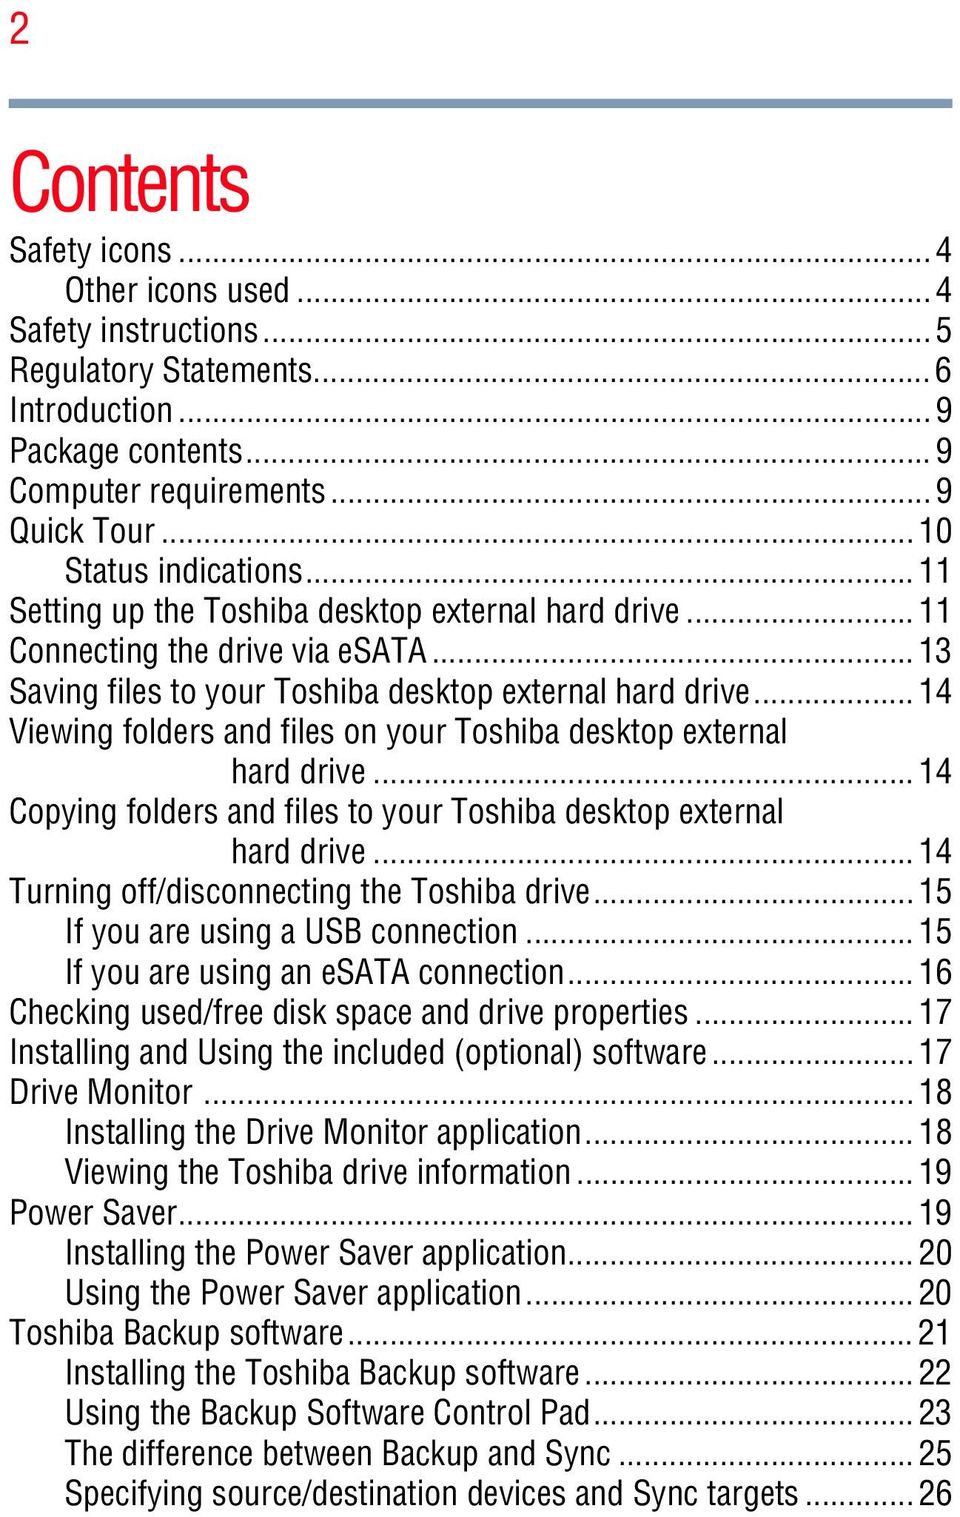 .. 14 Viewing folders and files on your Toshiba desktop external hard drive... 14 Copying folders and files to your Toshiba desktop external hard drive... 14 Turning off/disconnecting the Toshiba drive.